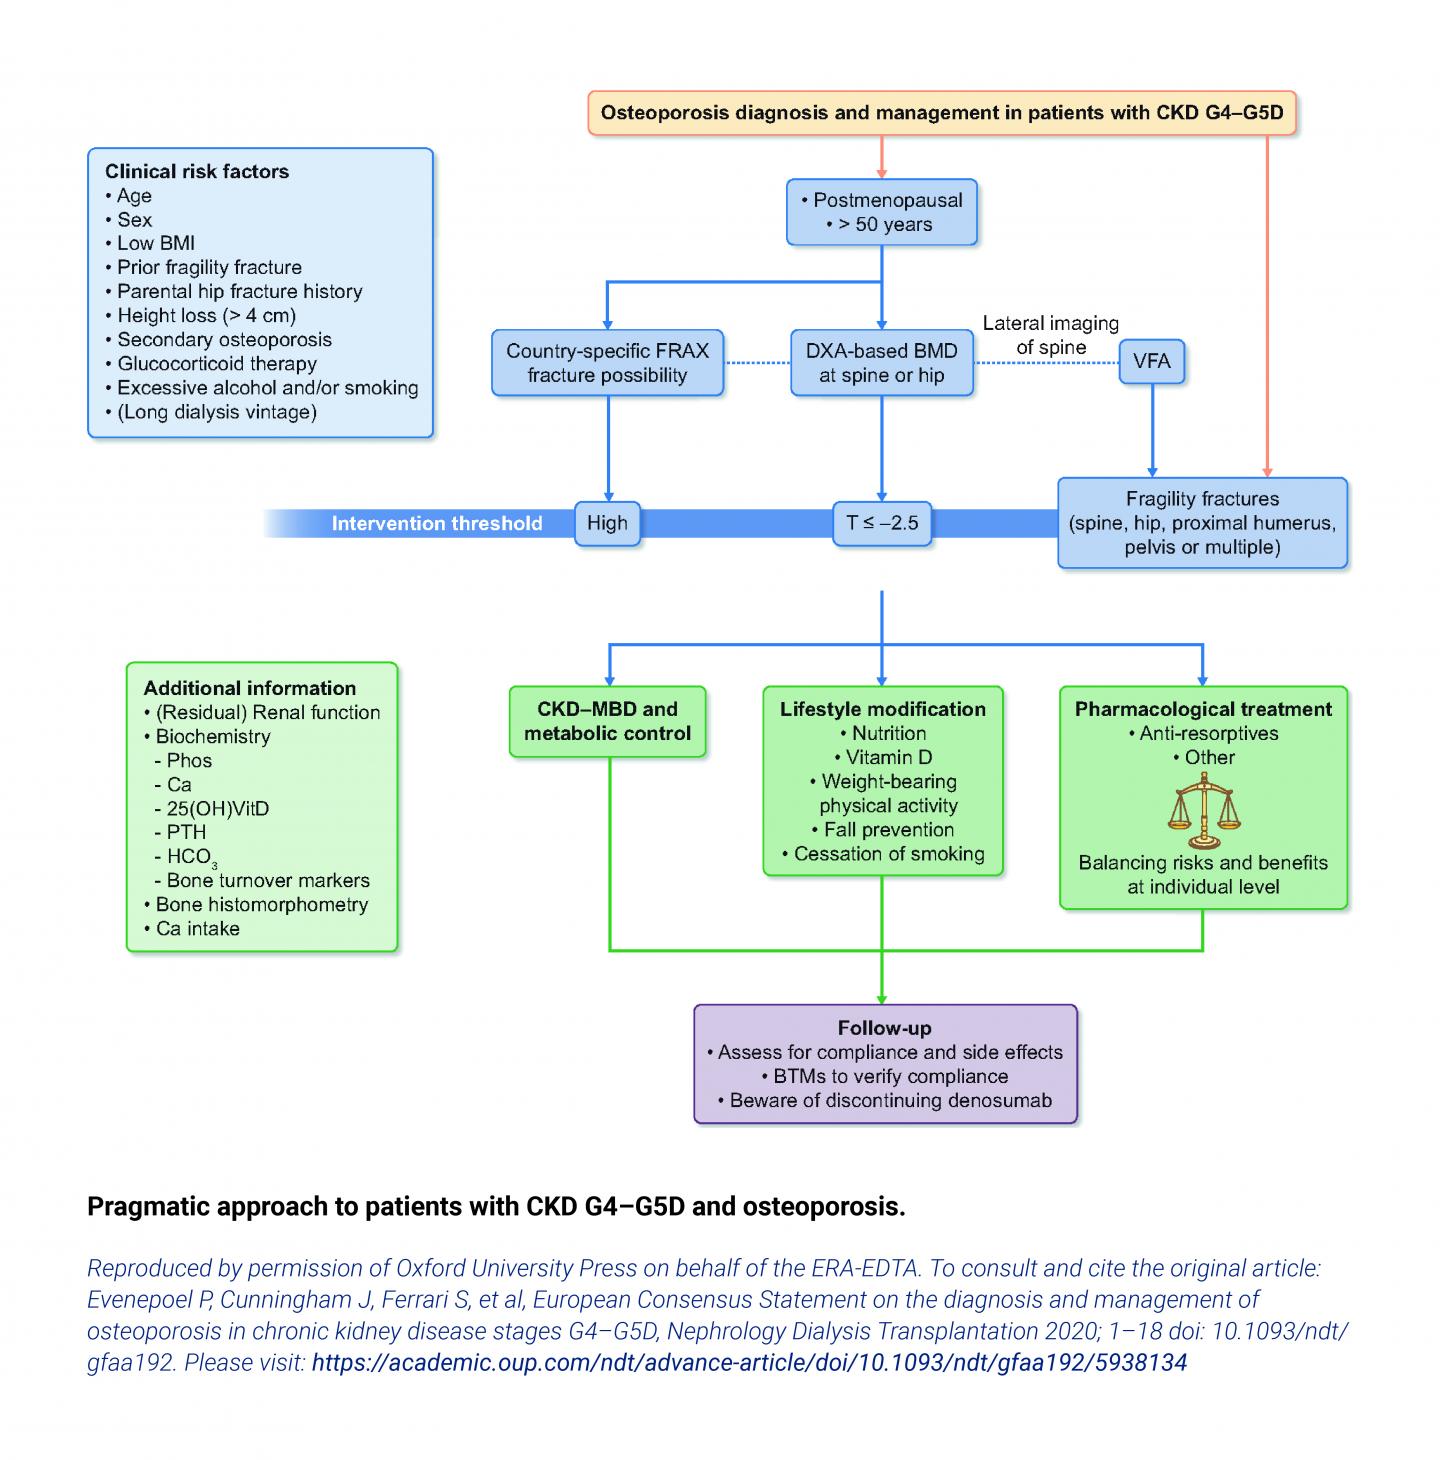 Osteoporosis diagnosis and management in patients with CKD G4-G5D